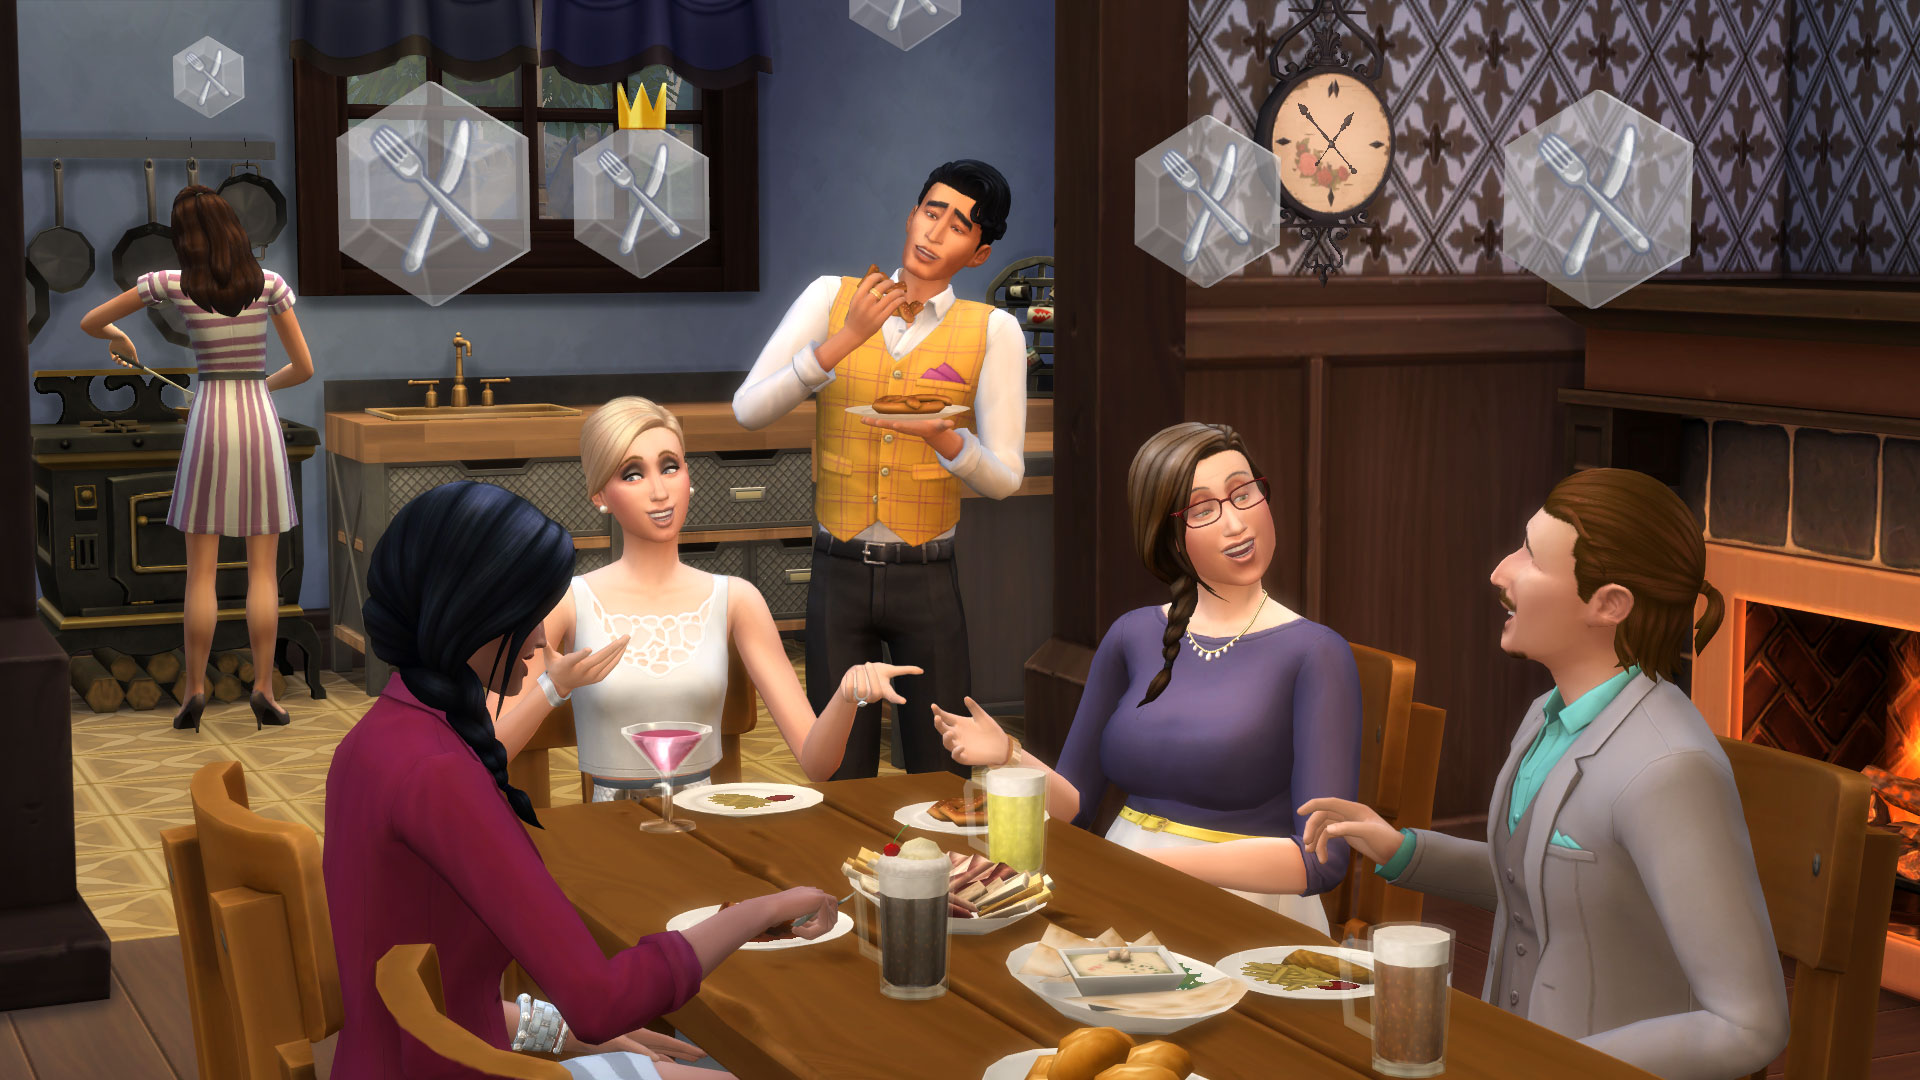 sims 4 torrent download free